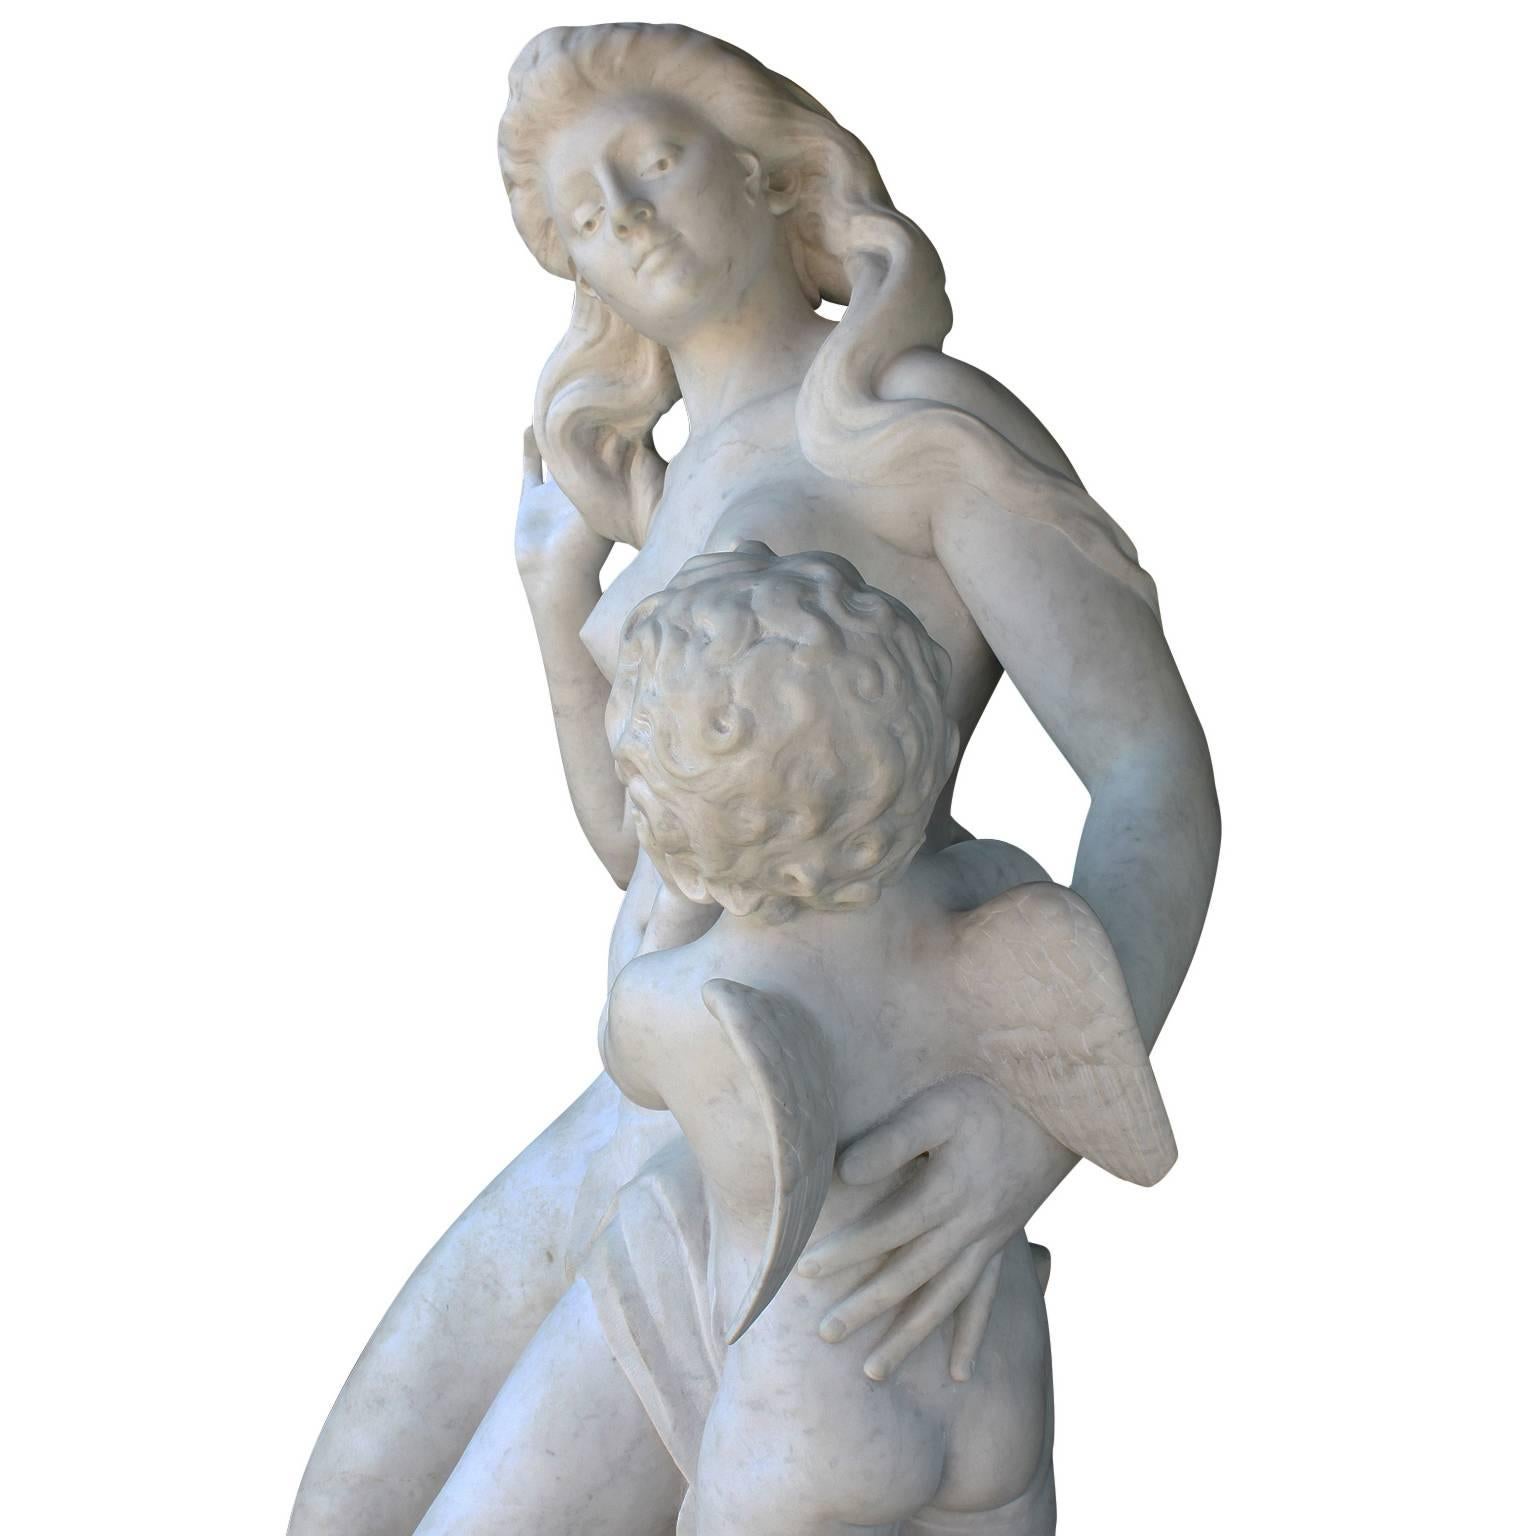 Lifesize French 19th-20th Century Carved Marble Sculpture of 